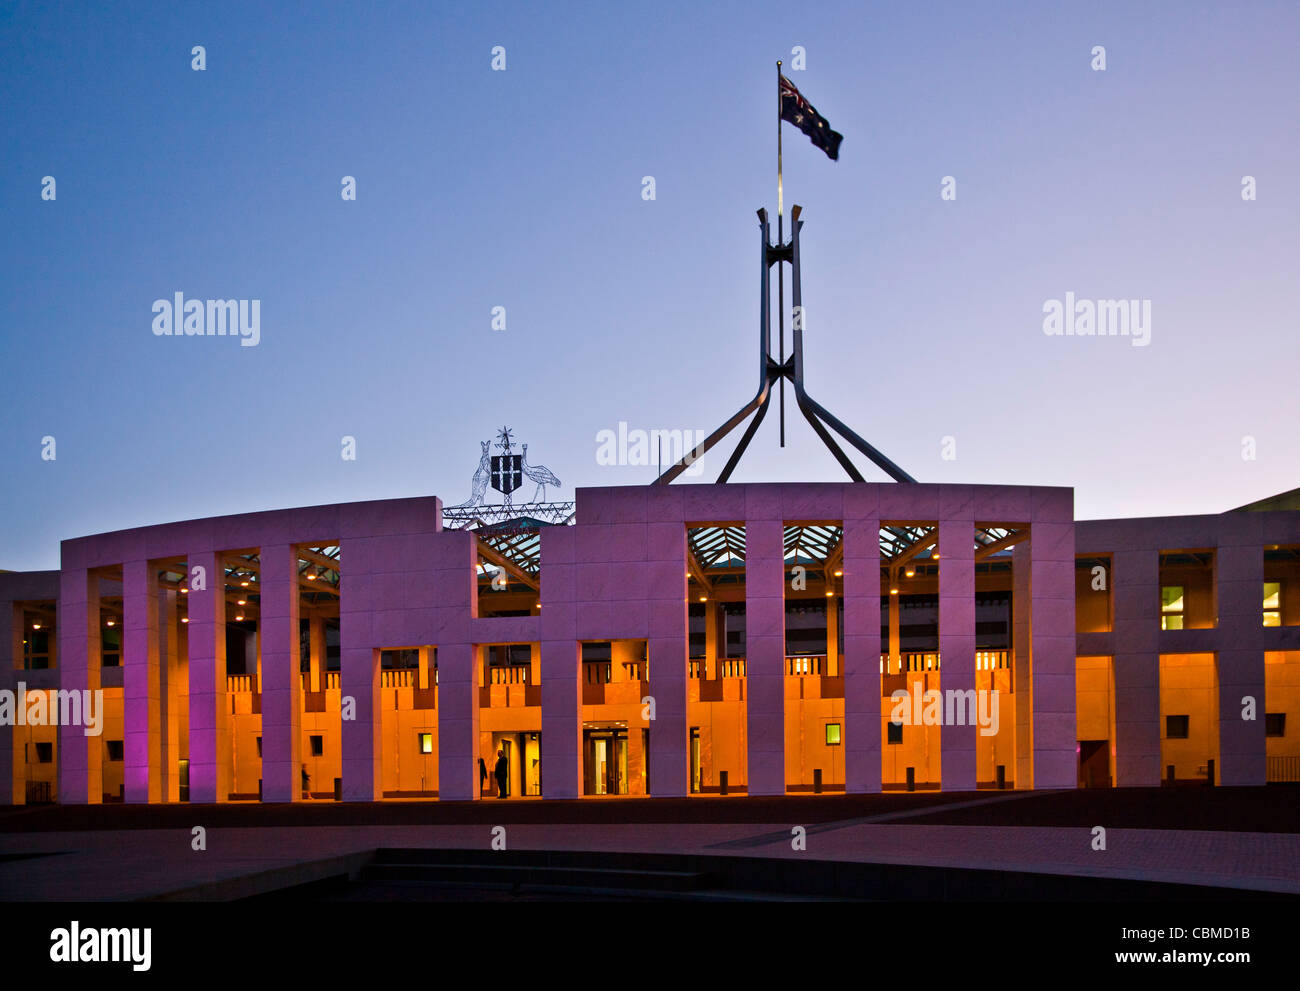 Australia, Australian Capital Territory, Canberra, Capital Hill, evening view of the Parliament of the Commonwealth of Australia Stock Photo